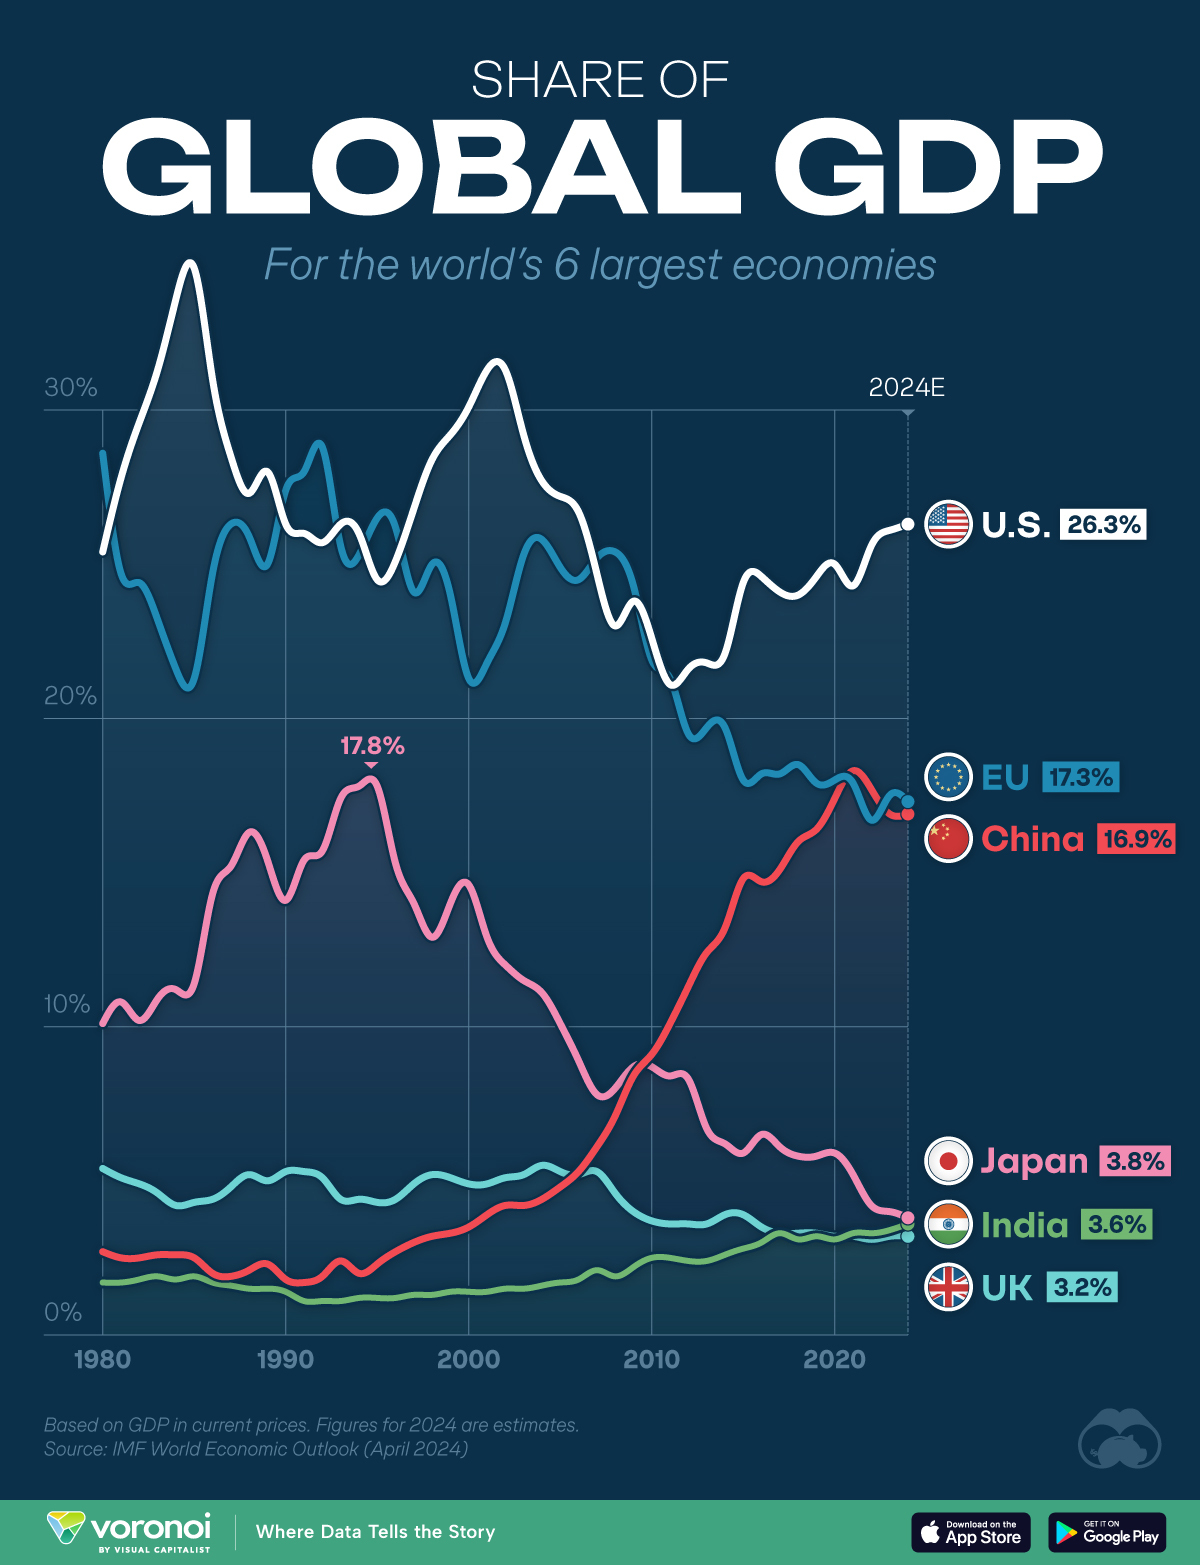 Chart showing the top 6 economies' share of global GDP